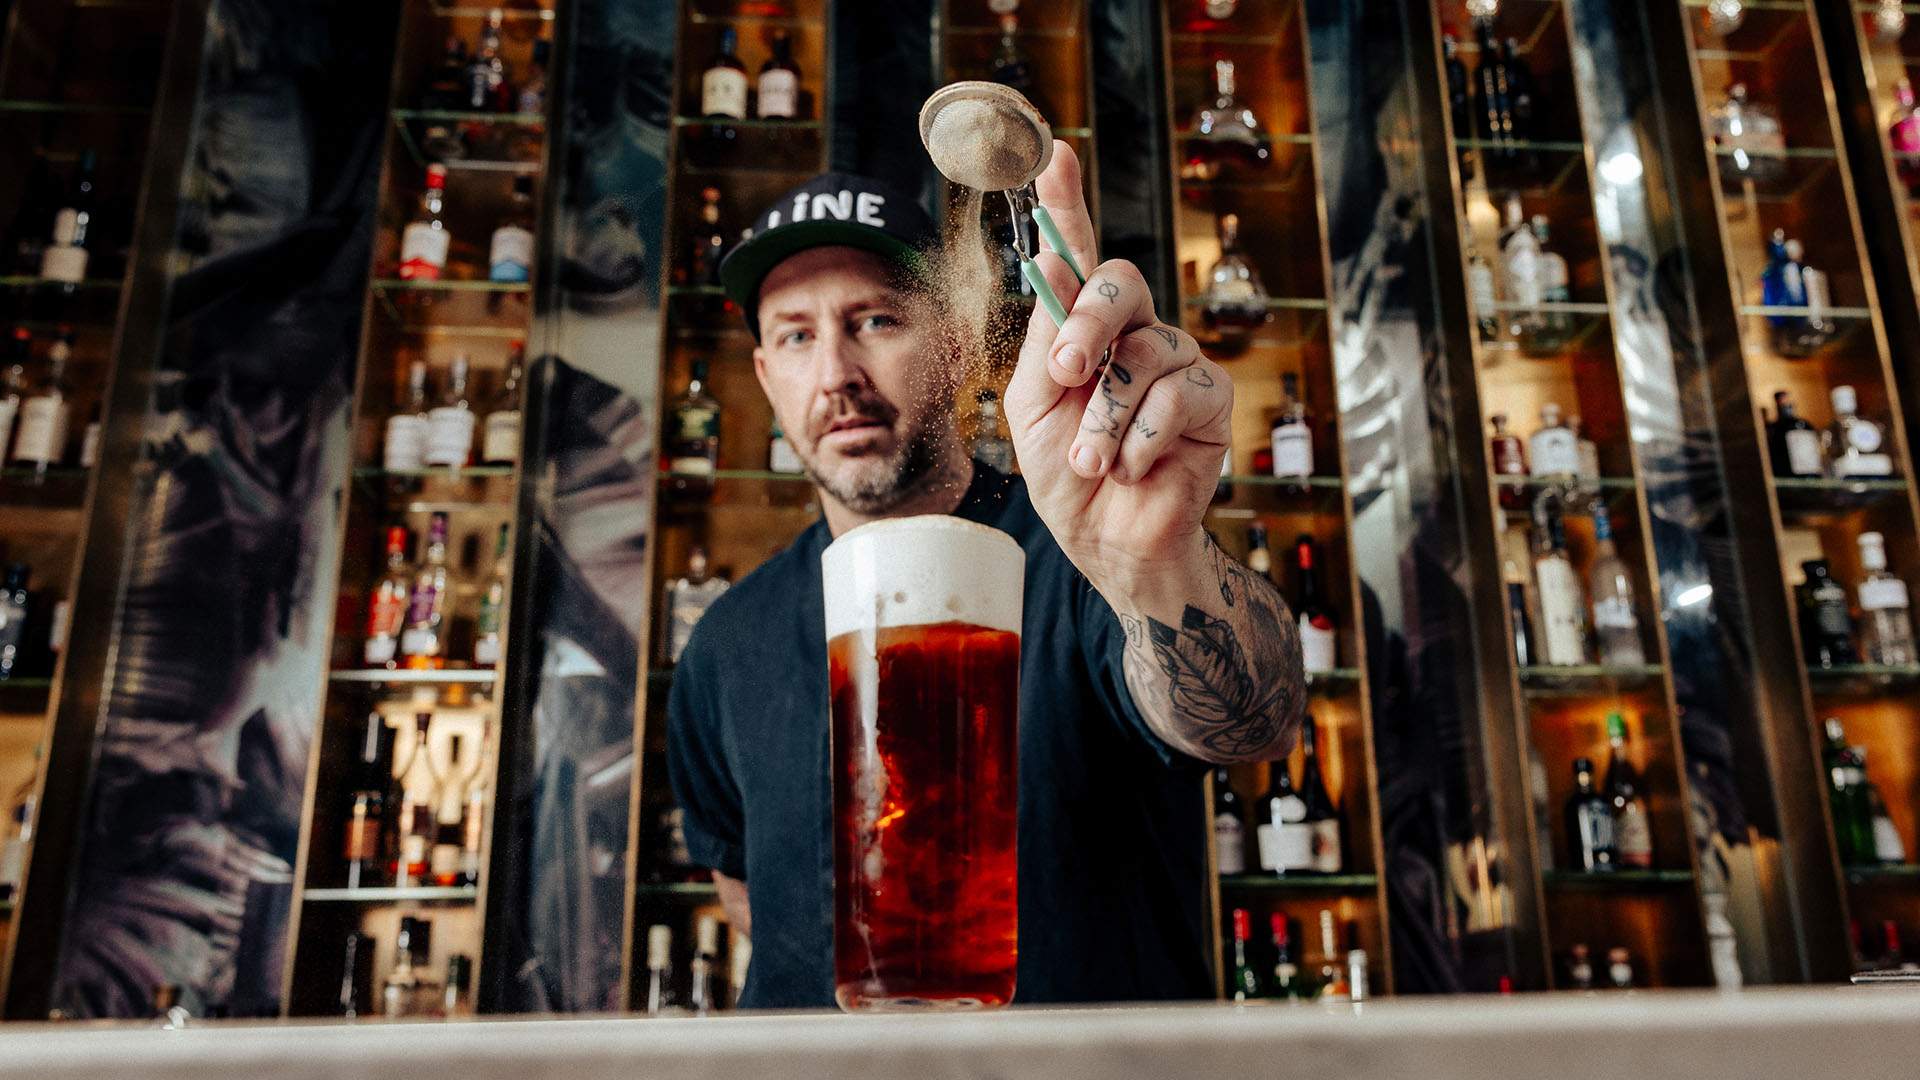 Matt Whiley From Sydney's Re Has Whipped Up a Sustainability-Focused Cocktail Menu for W Brisbane's Living Room Bar